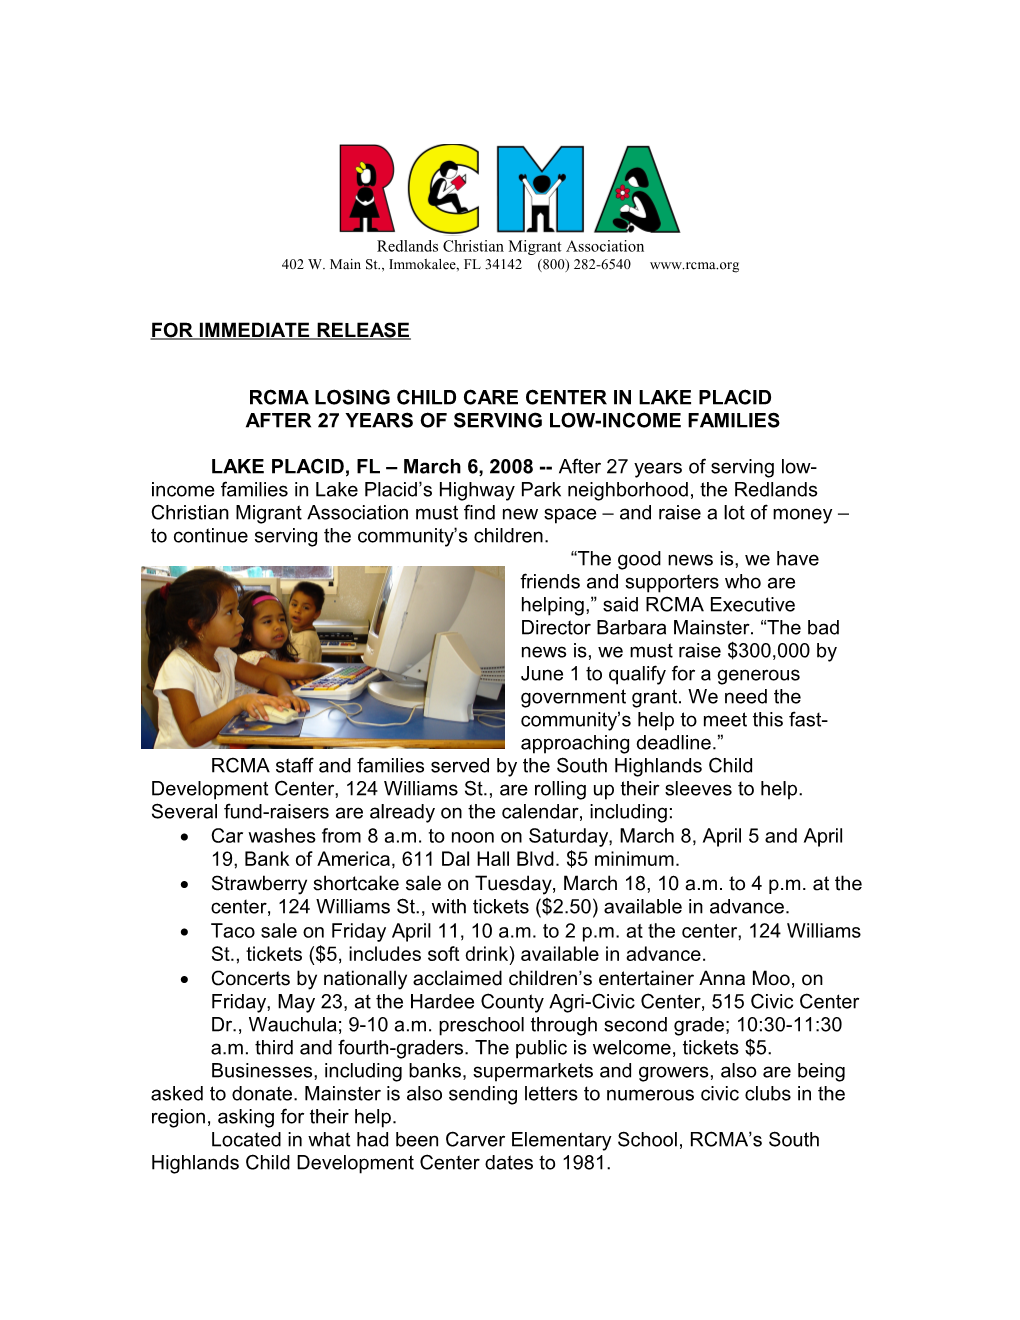 Rcma Losing Child Care Center in Highway Park After Xx Years